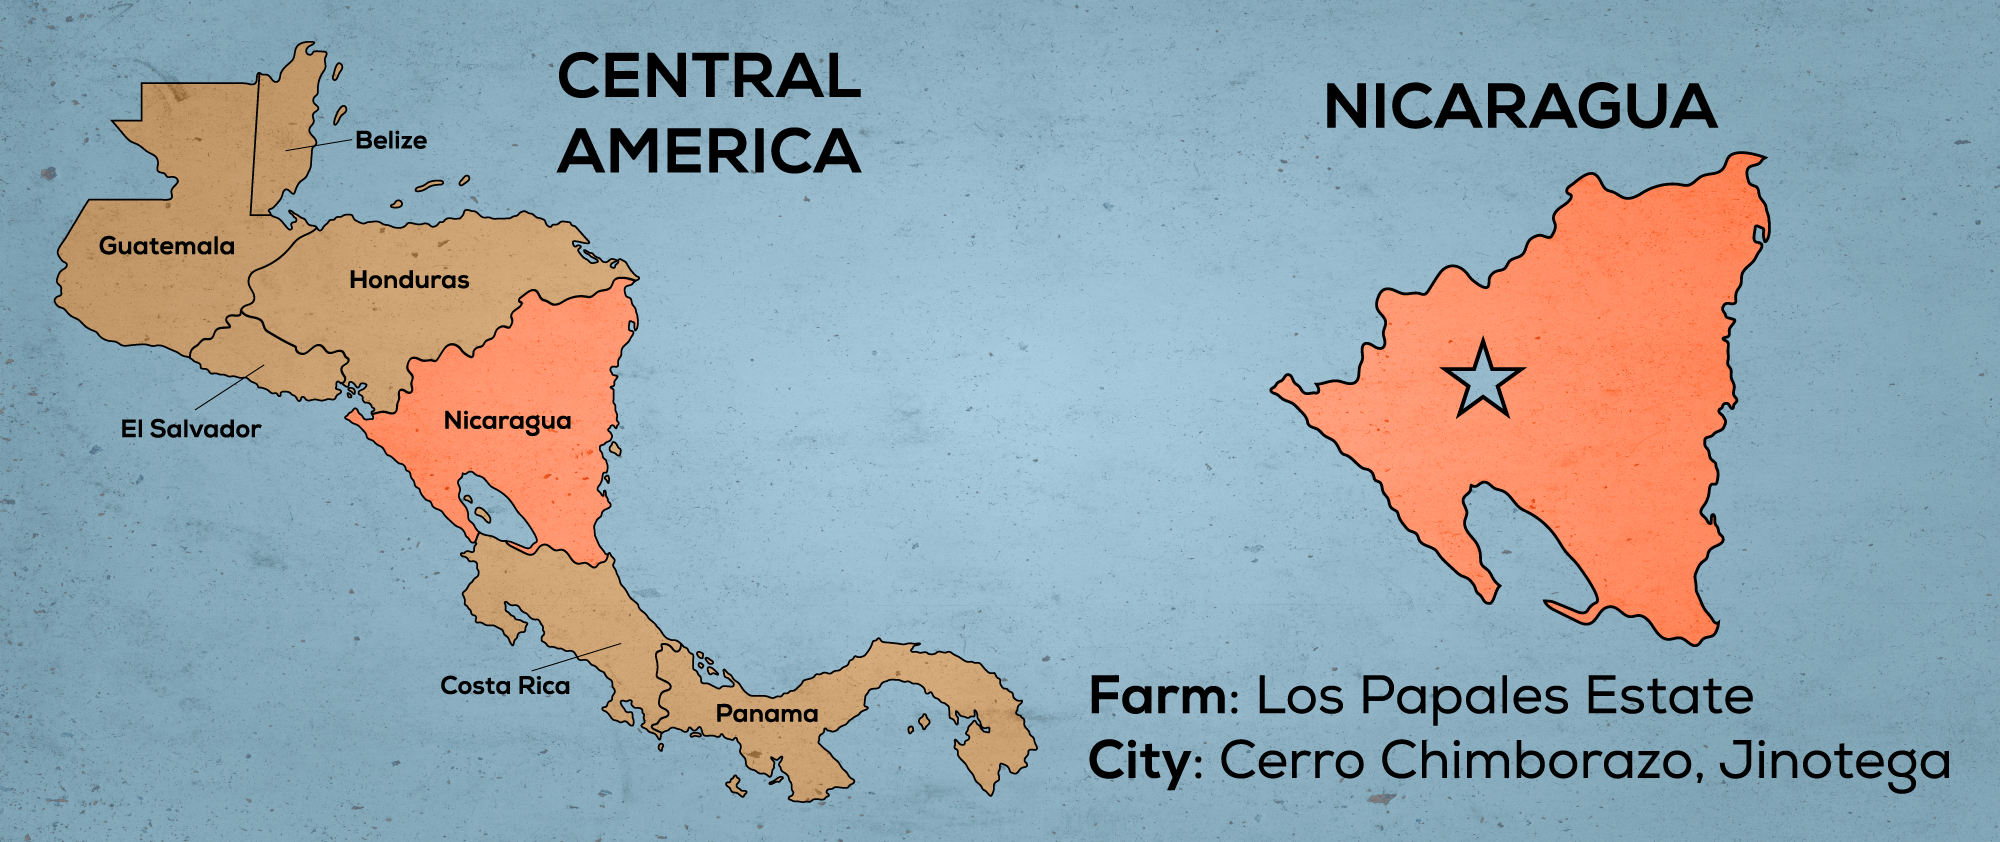 Map of Central America & Nicaragua